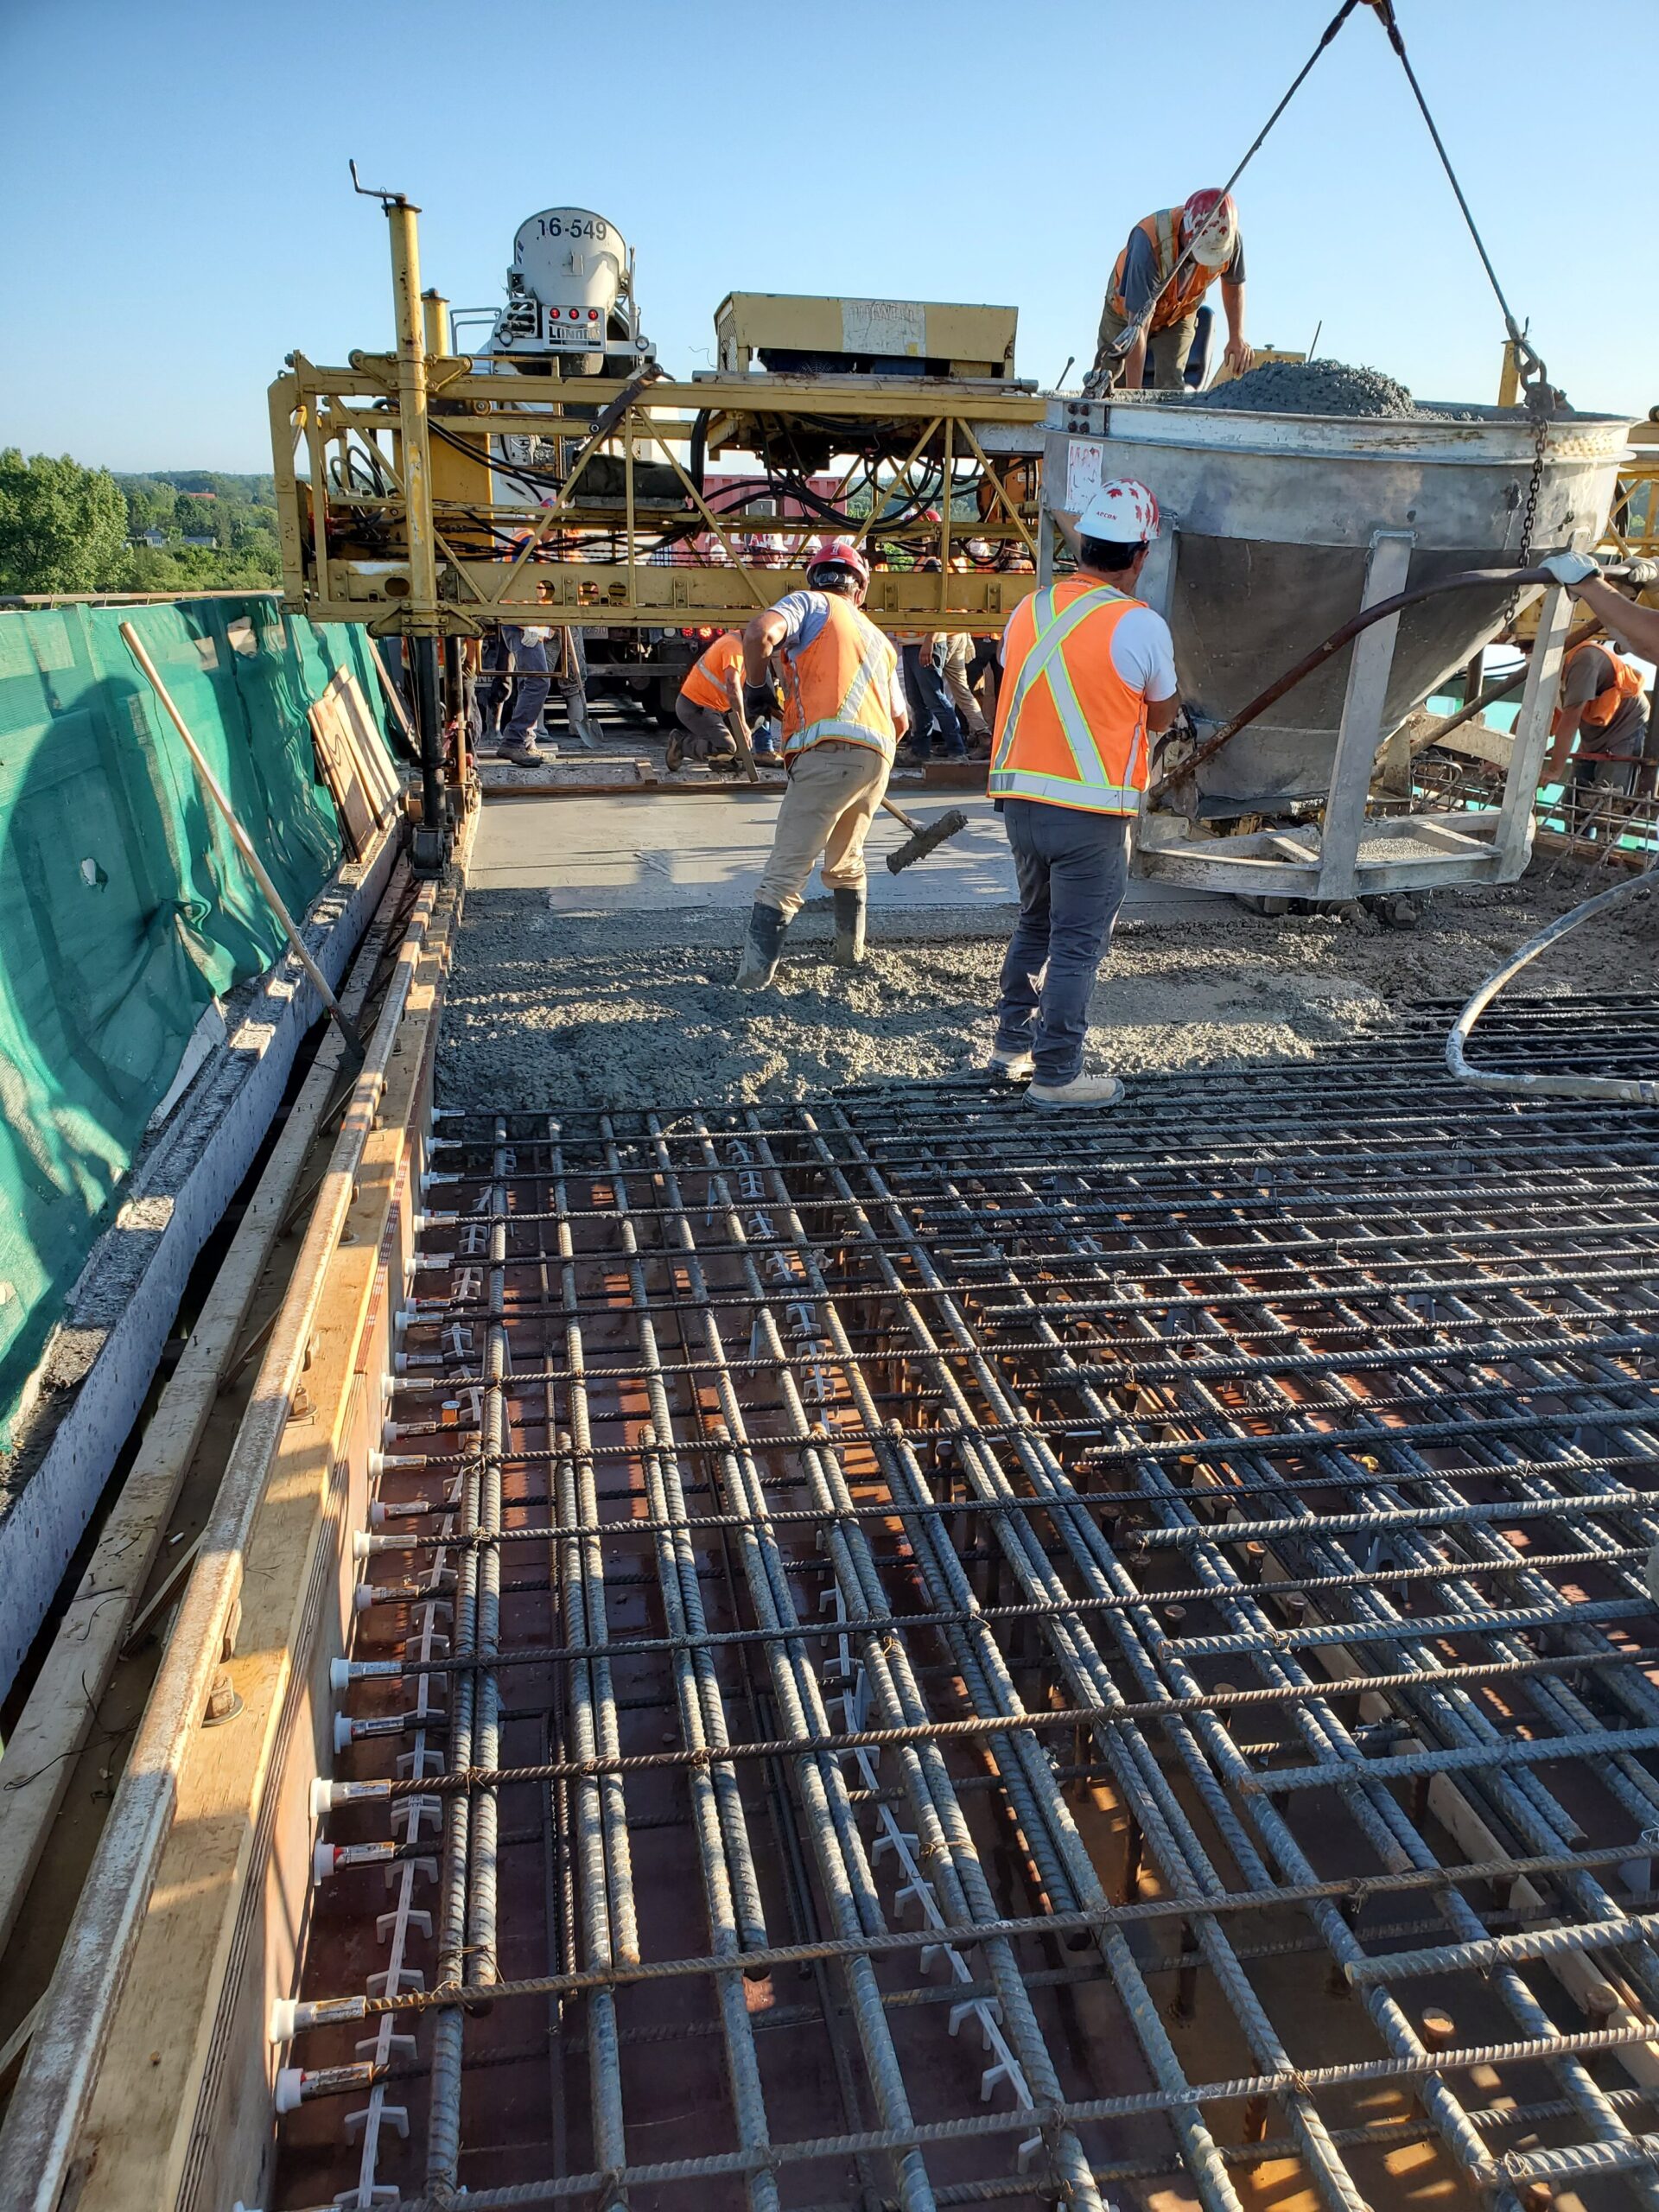 Concrete hopper containing concrete being lowered to the deck